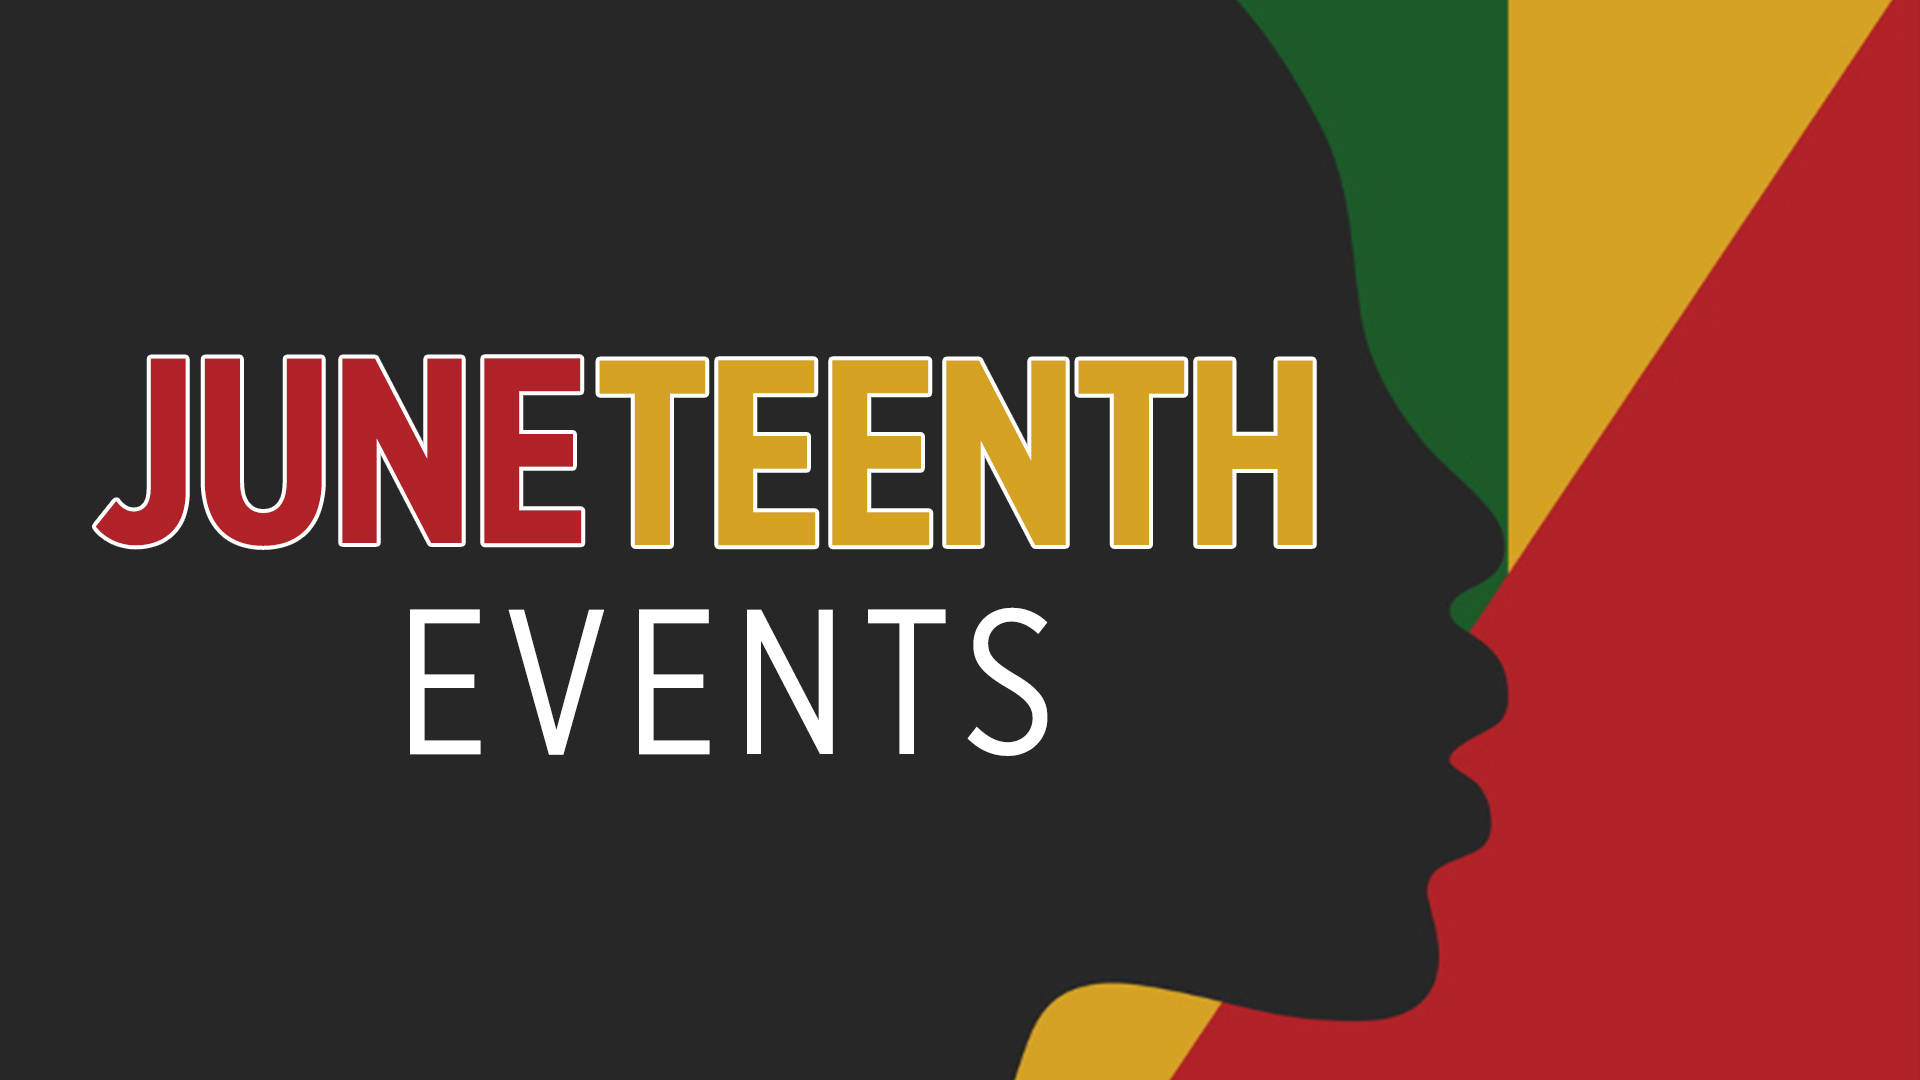 Colorful Juneteenth Events